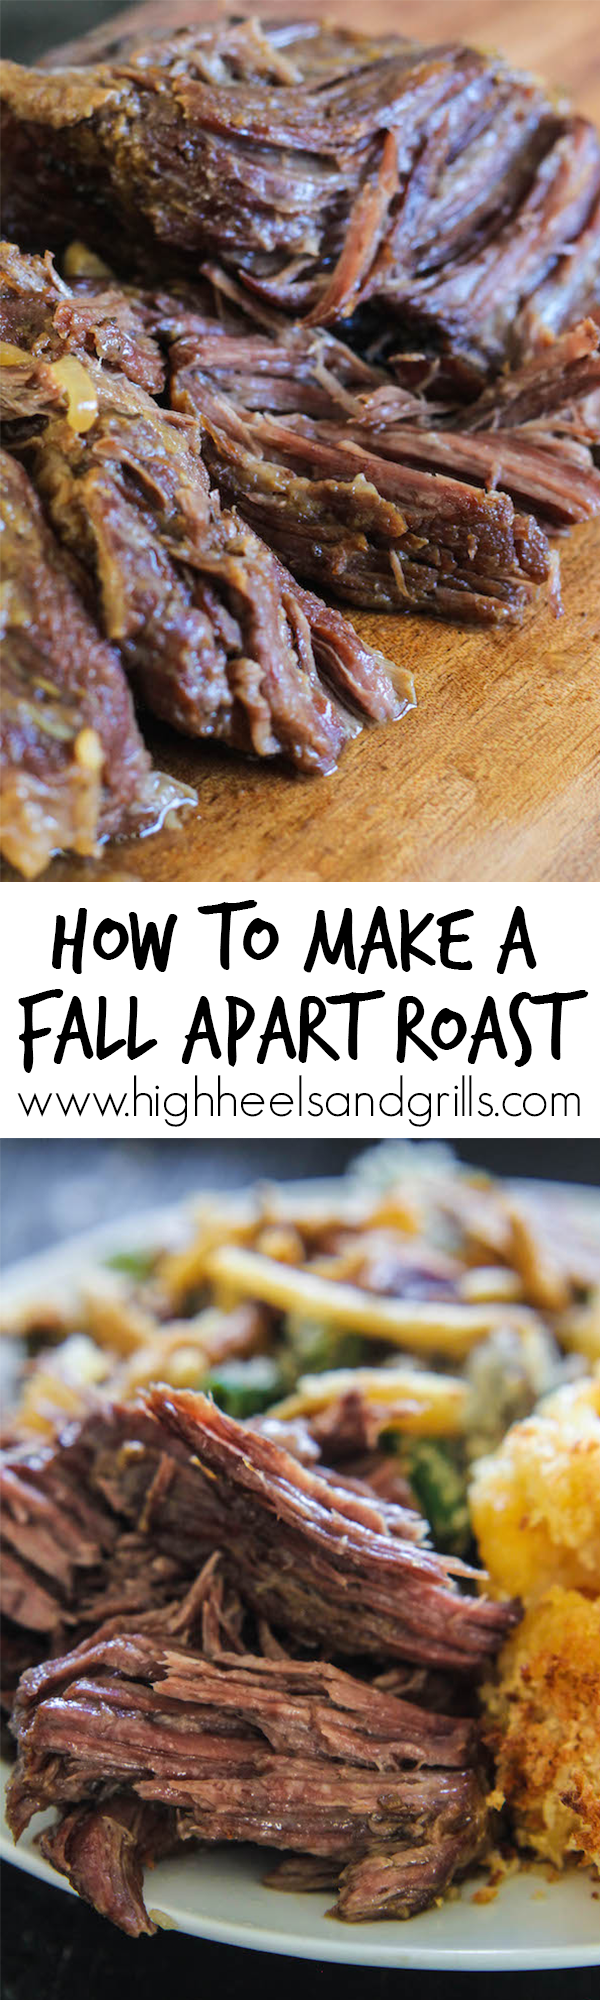 https://www.highheelsandgrills.com/wp-content/uploads/2015/06/How-to-Make-a-Fall-Apart-Roast-Collage1.png